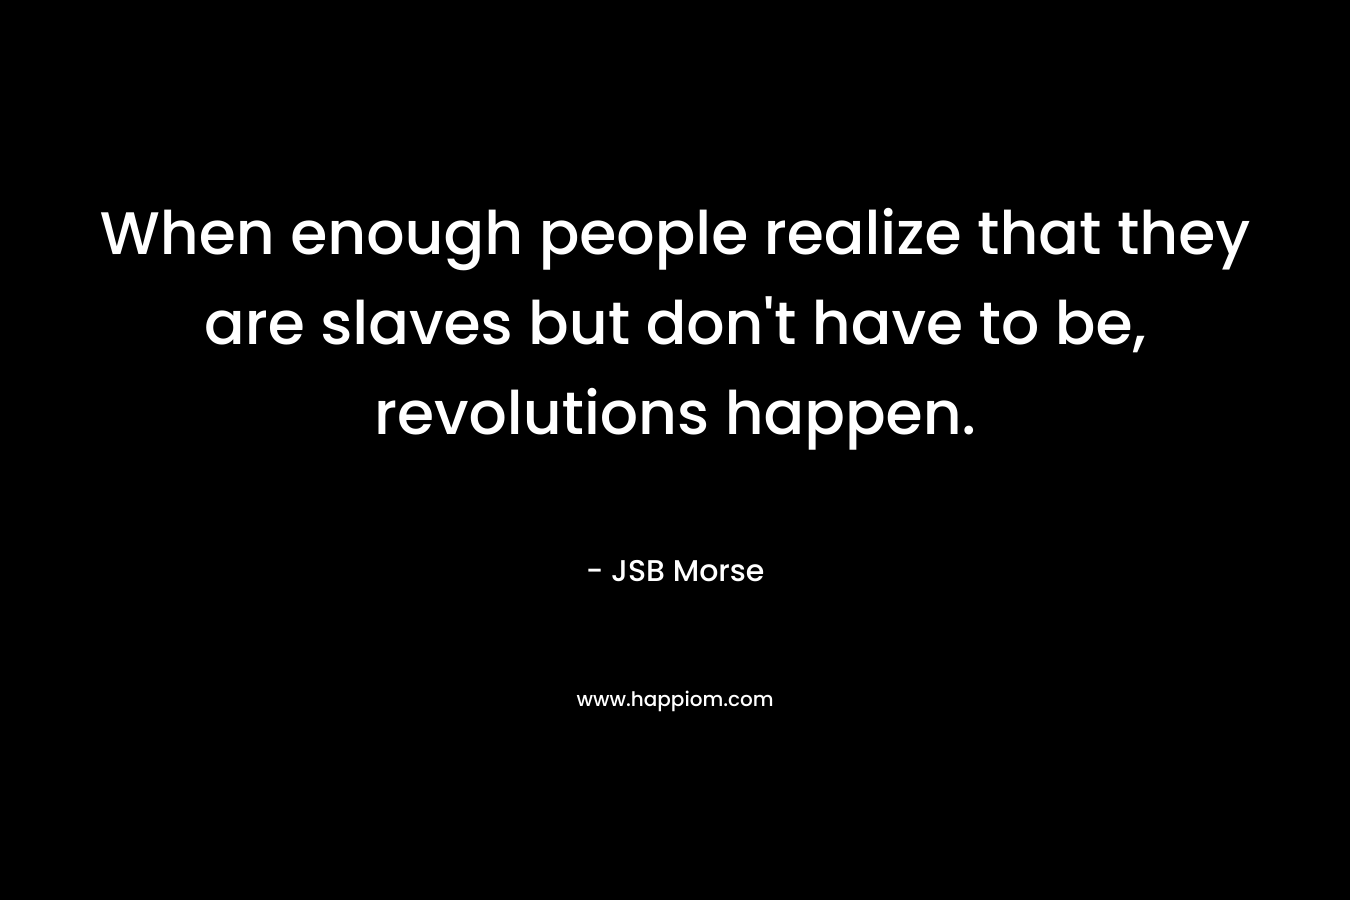 When enough people realize that they are slaves but don't have to be, revolutions happen.